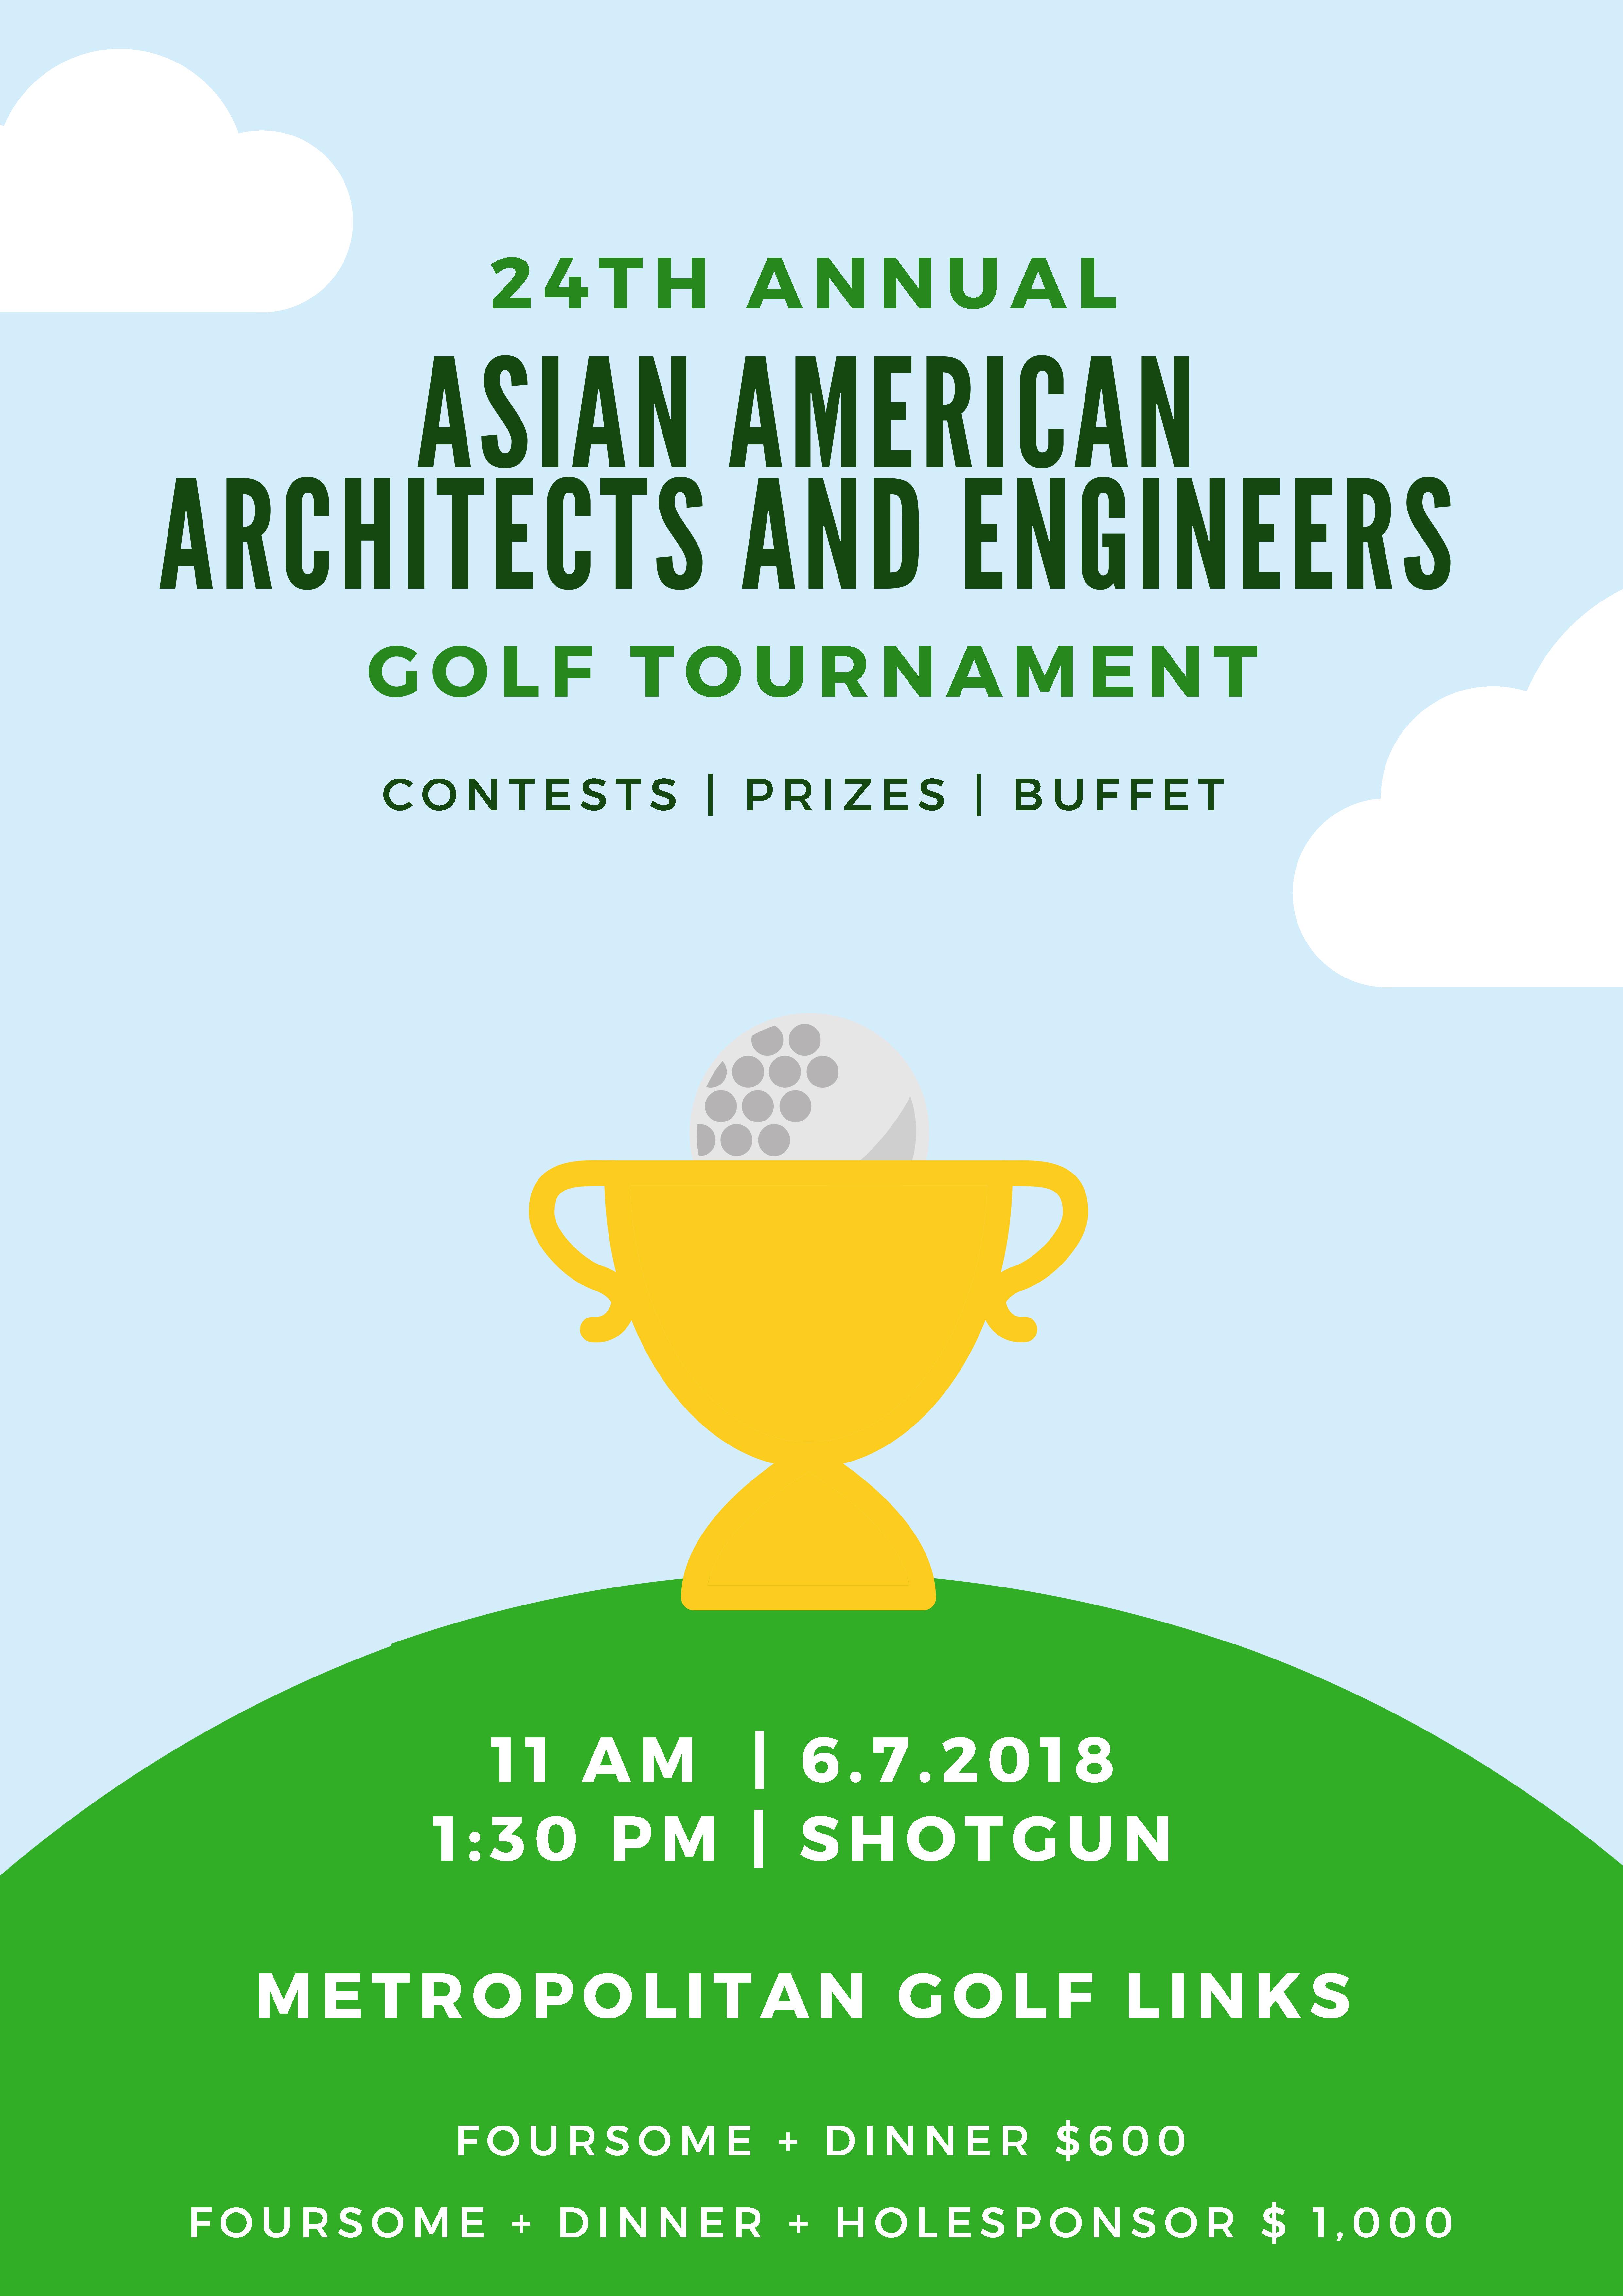 24th Annual Asian American Architects and Engineers Golf Tournament